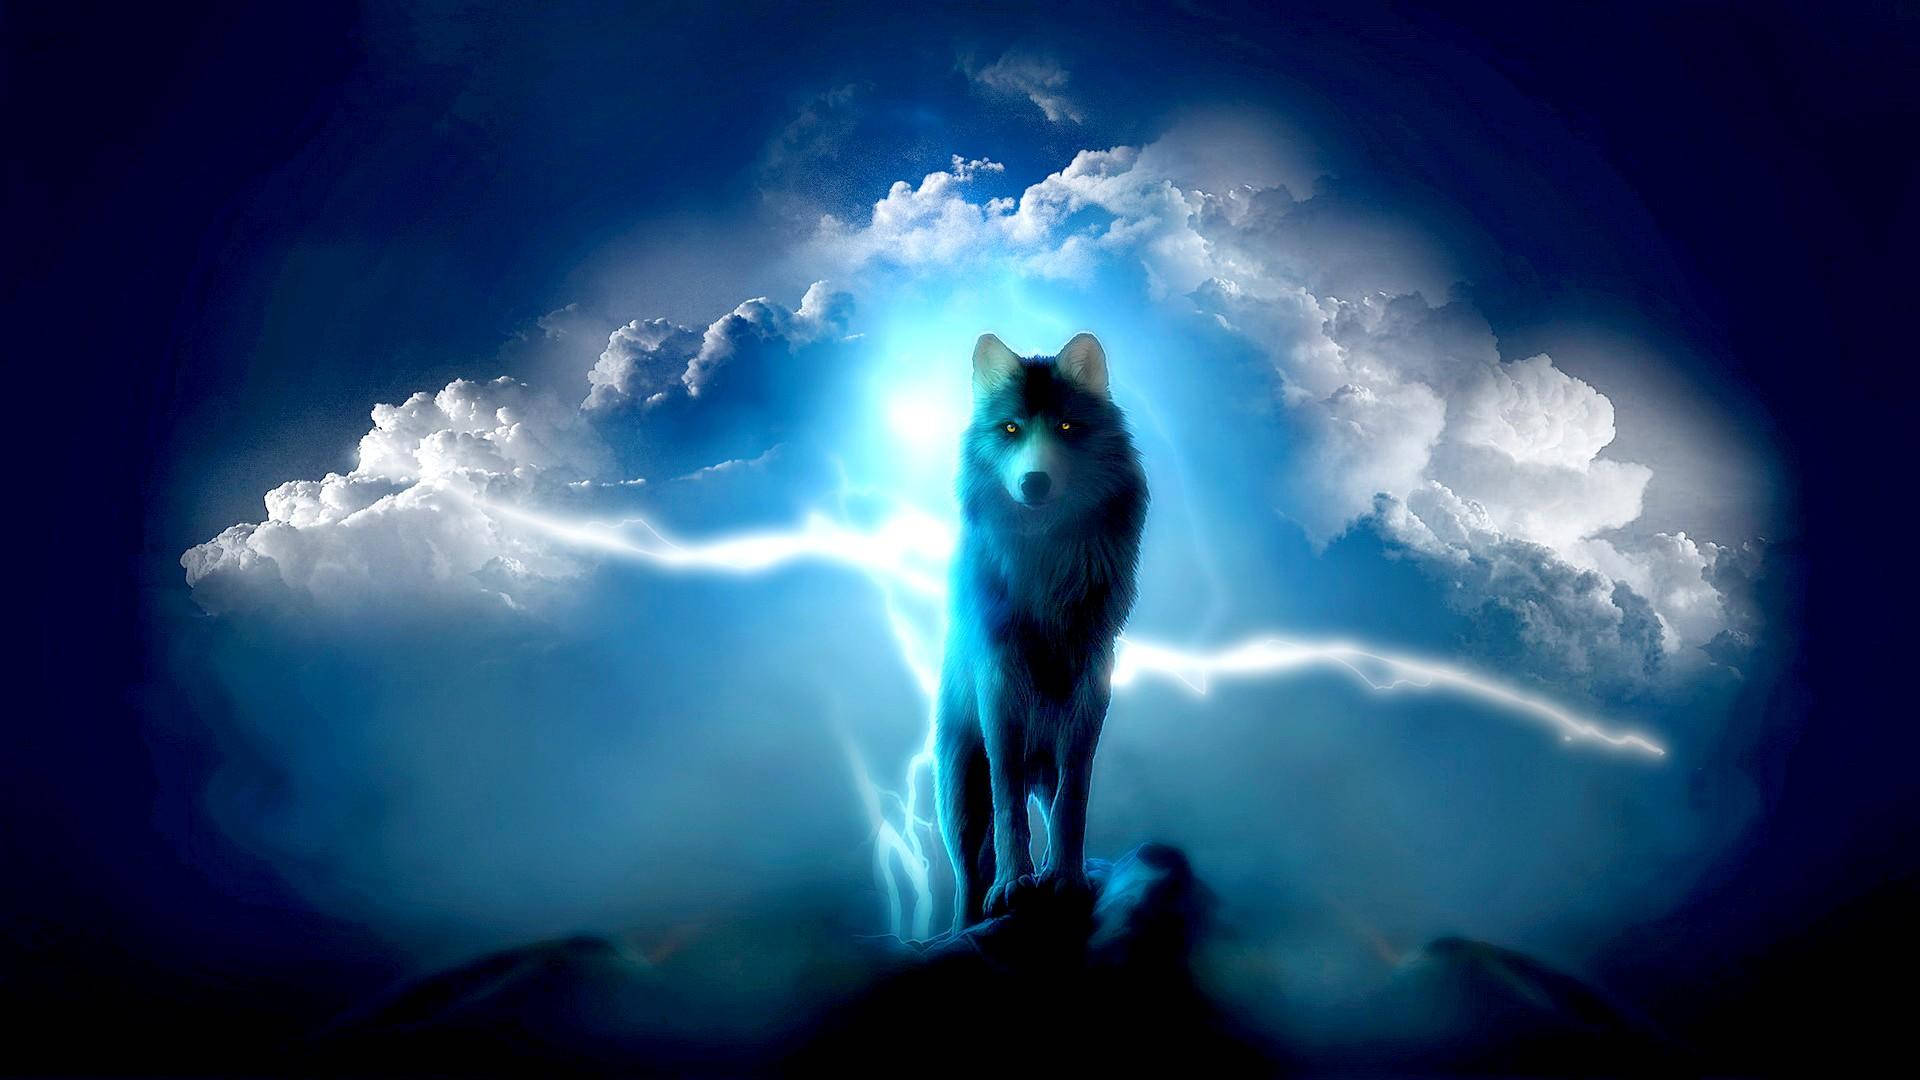 “A majestic blue wolf stares across the desolate landscape” Wallpaper